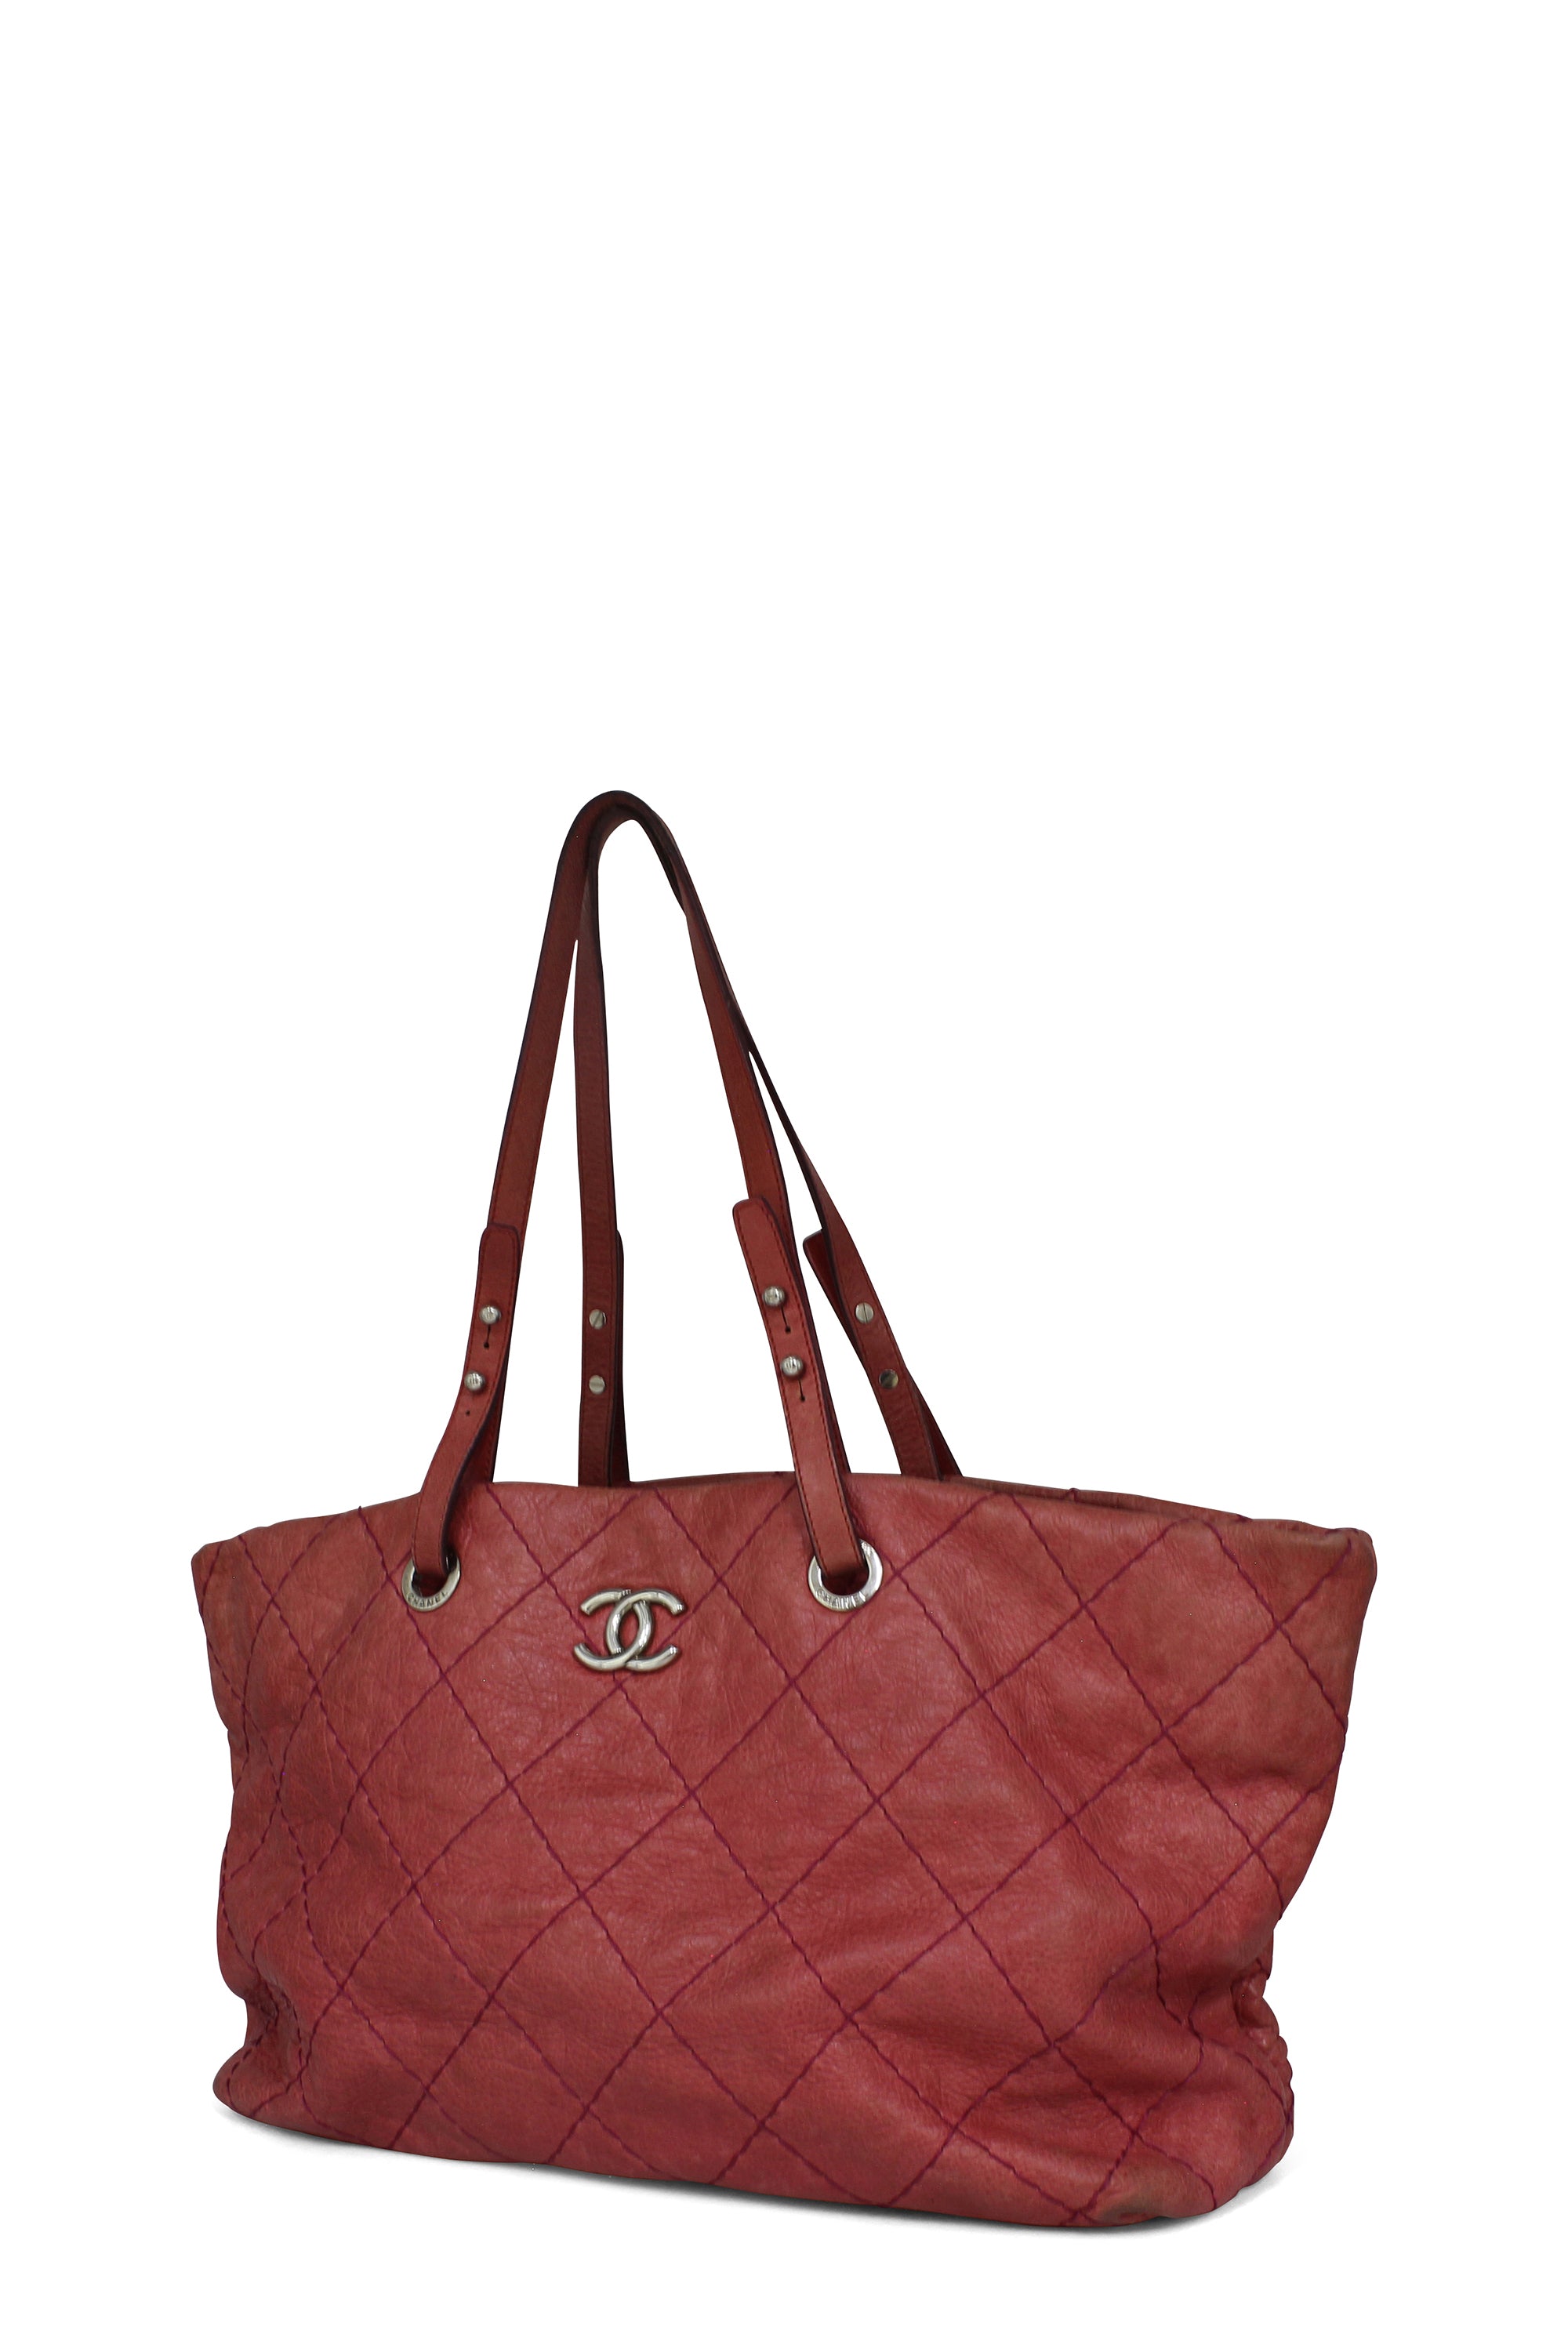 Chanel On The Road Tote - Neutrals Totes, Handbags - CHA665796